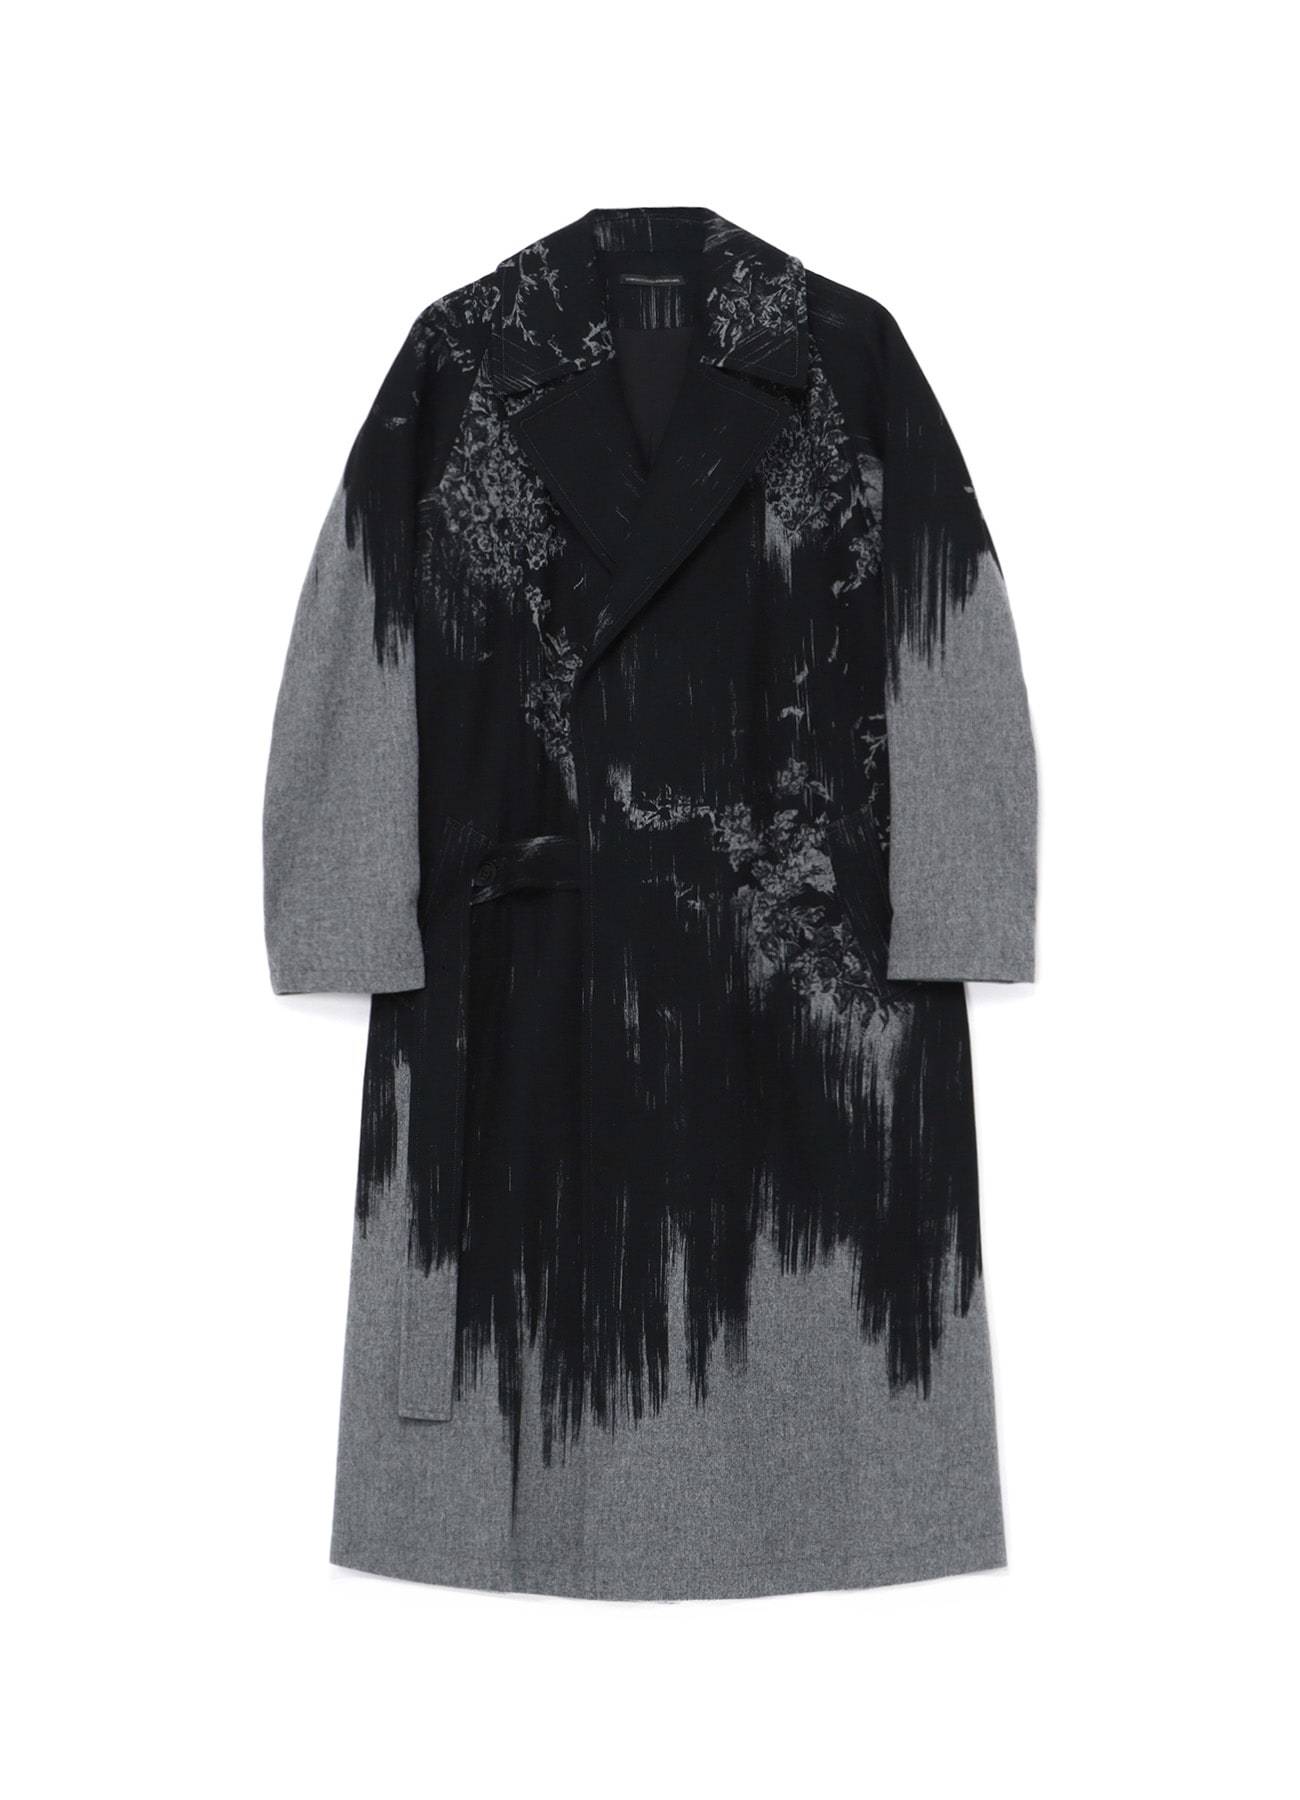 New Arrival | [Official] THE SHOP YOHJI YAMAMOTO (2/11 pages)